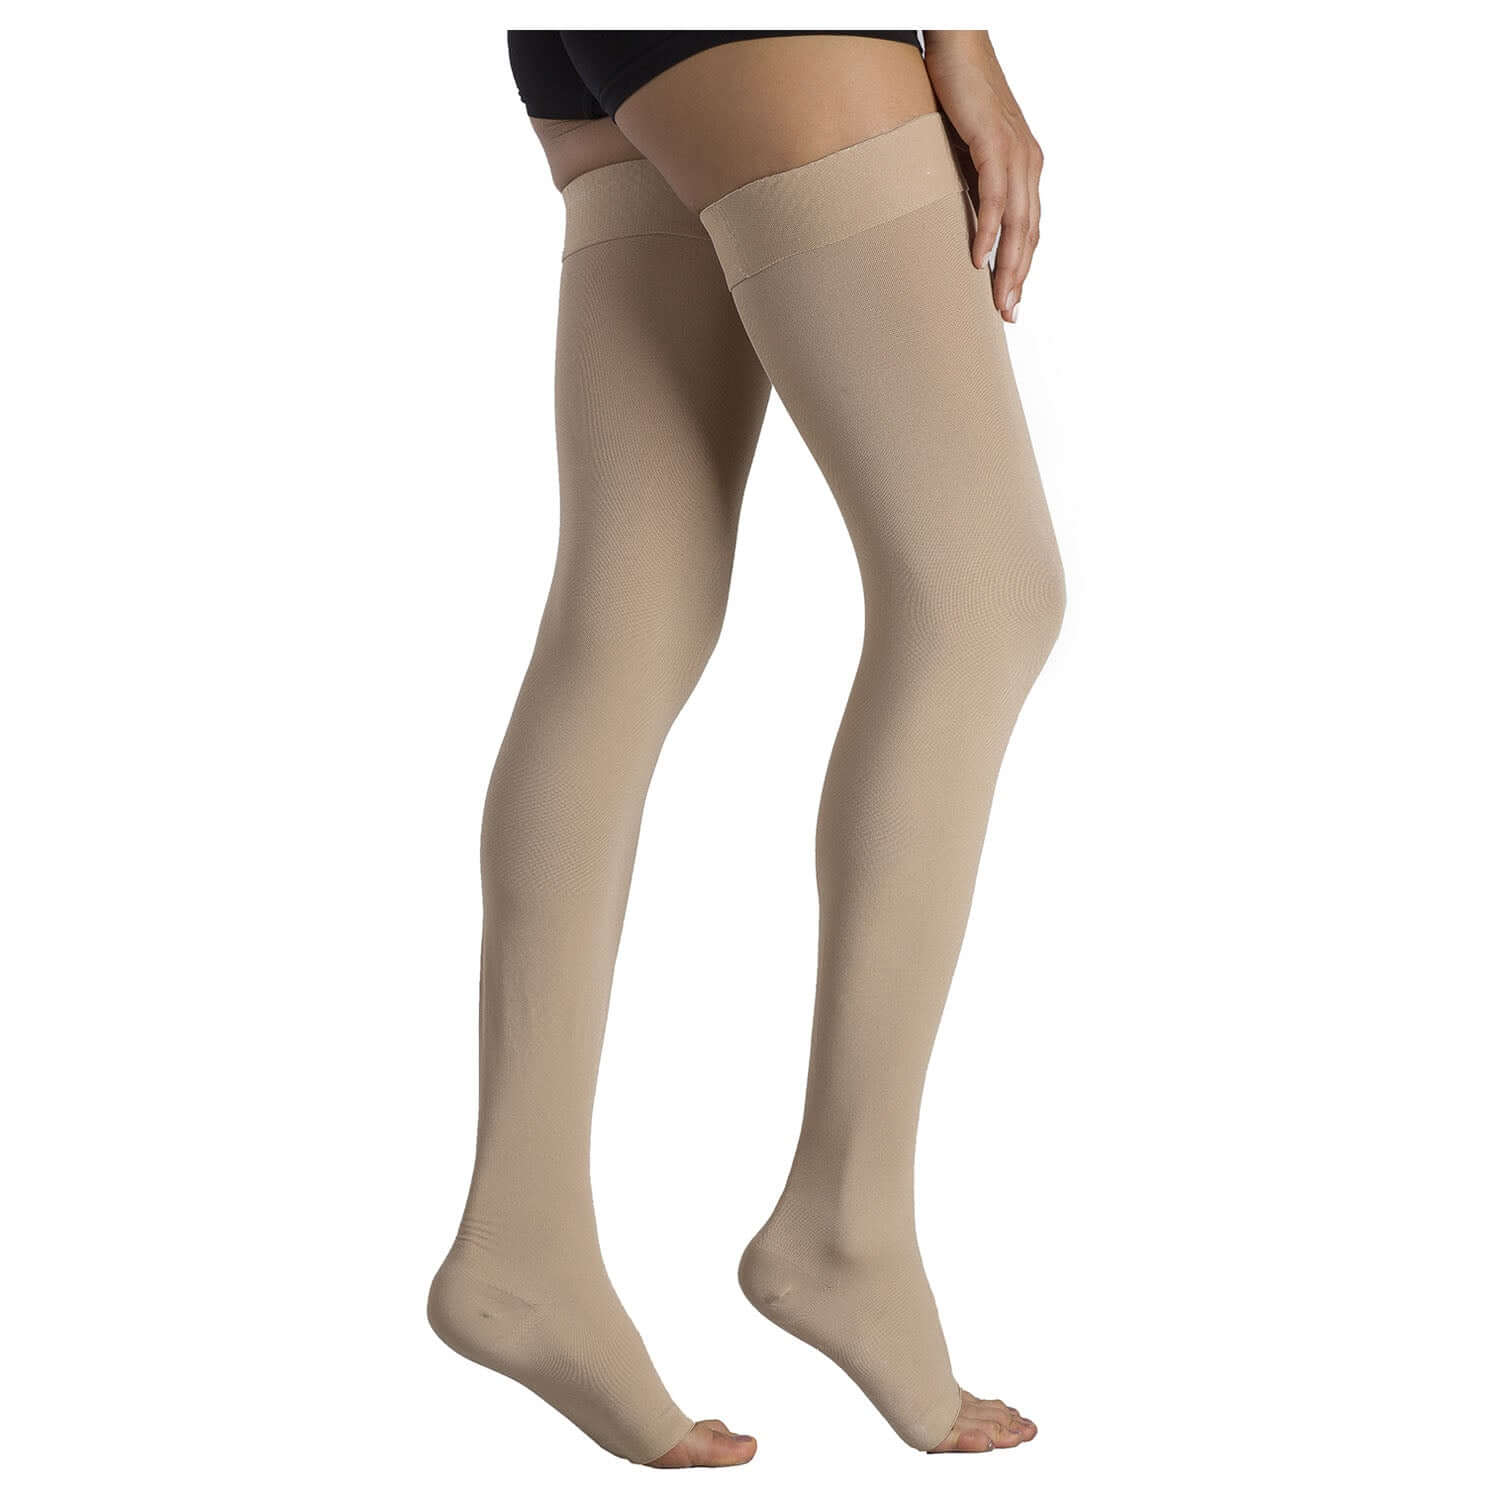 23-32mmHg Graduated Compression Stockings Medical Support Socks for Varicose  Veins, Edema - Huibo Medical